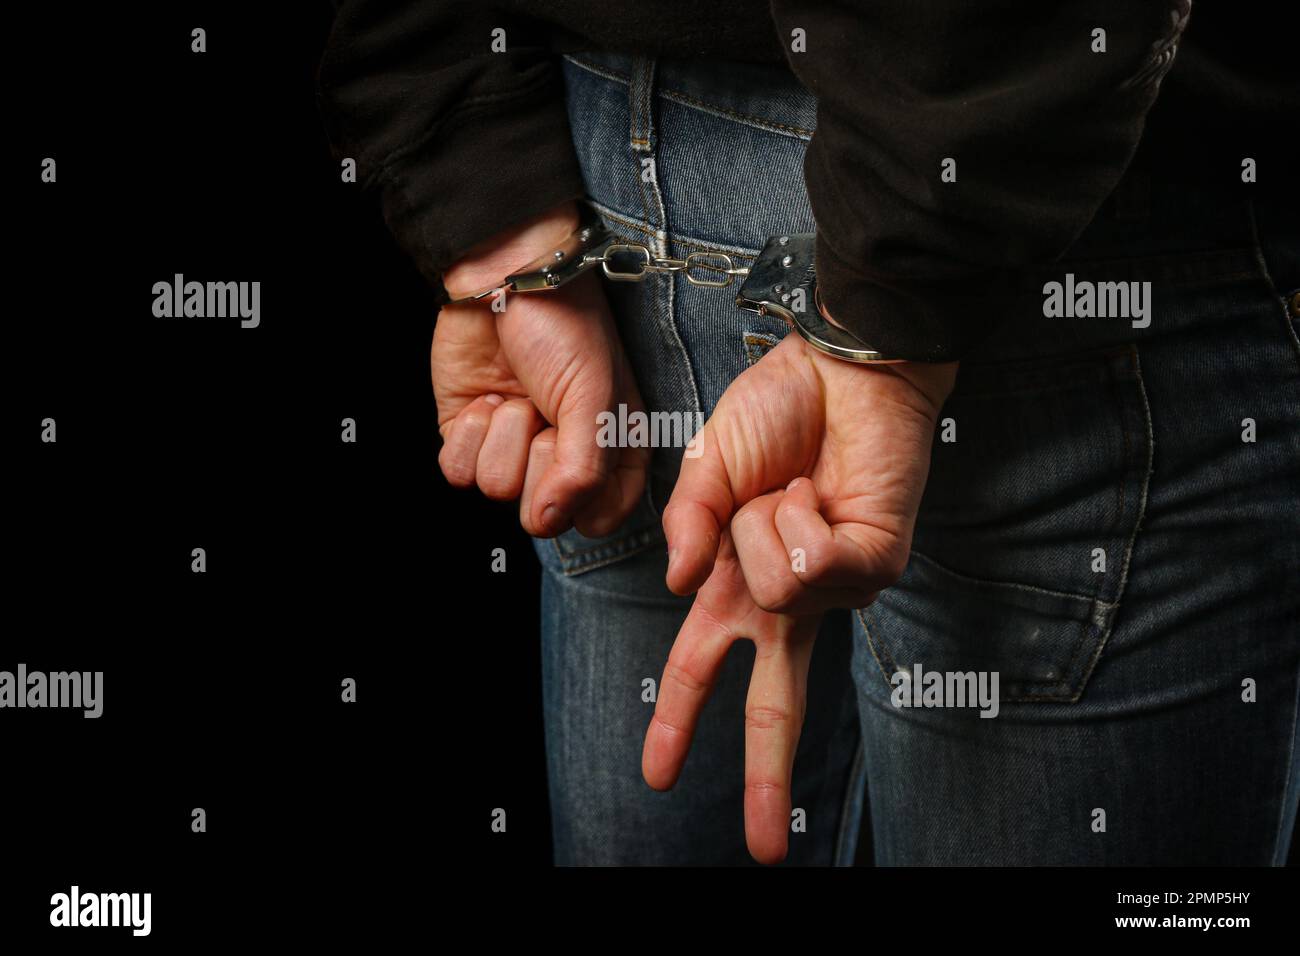 Arrested teenage boy in handcuffs showing just his hands doing a v sign Stock Photo